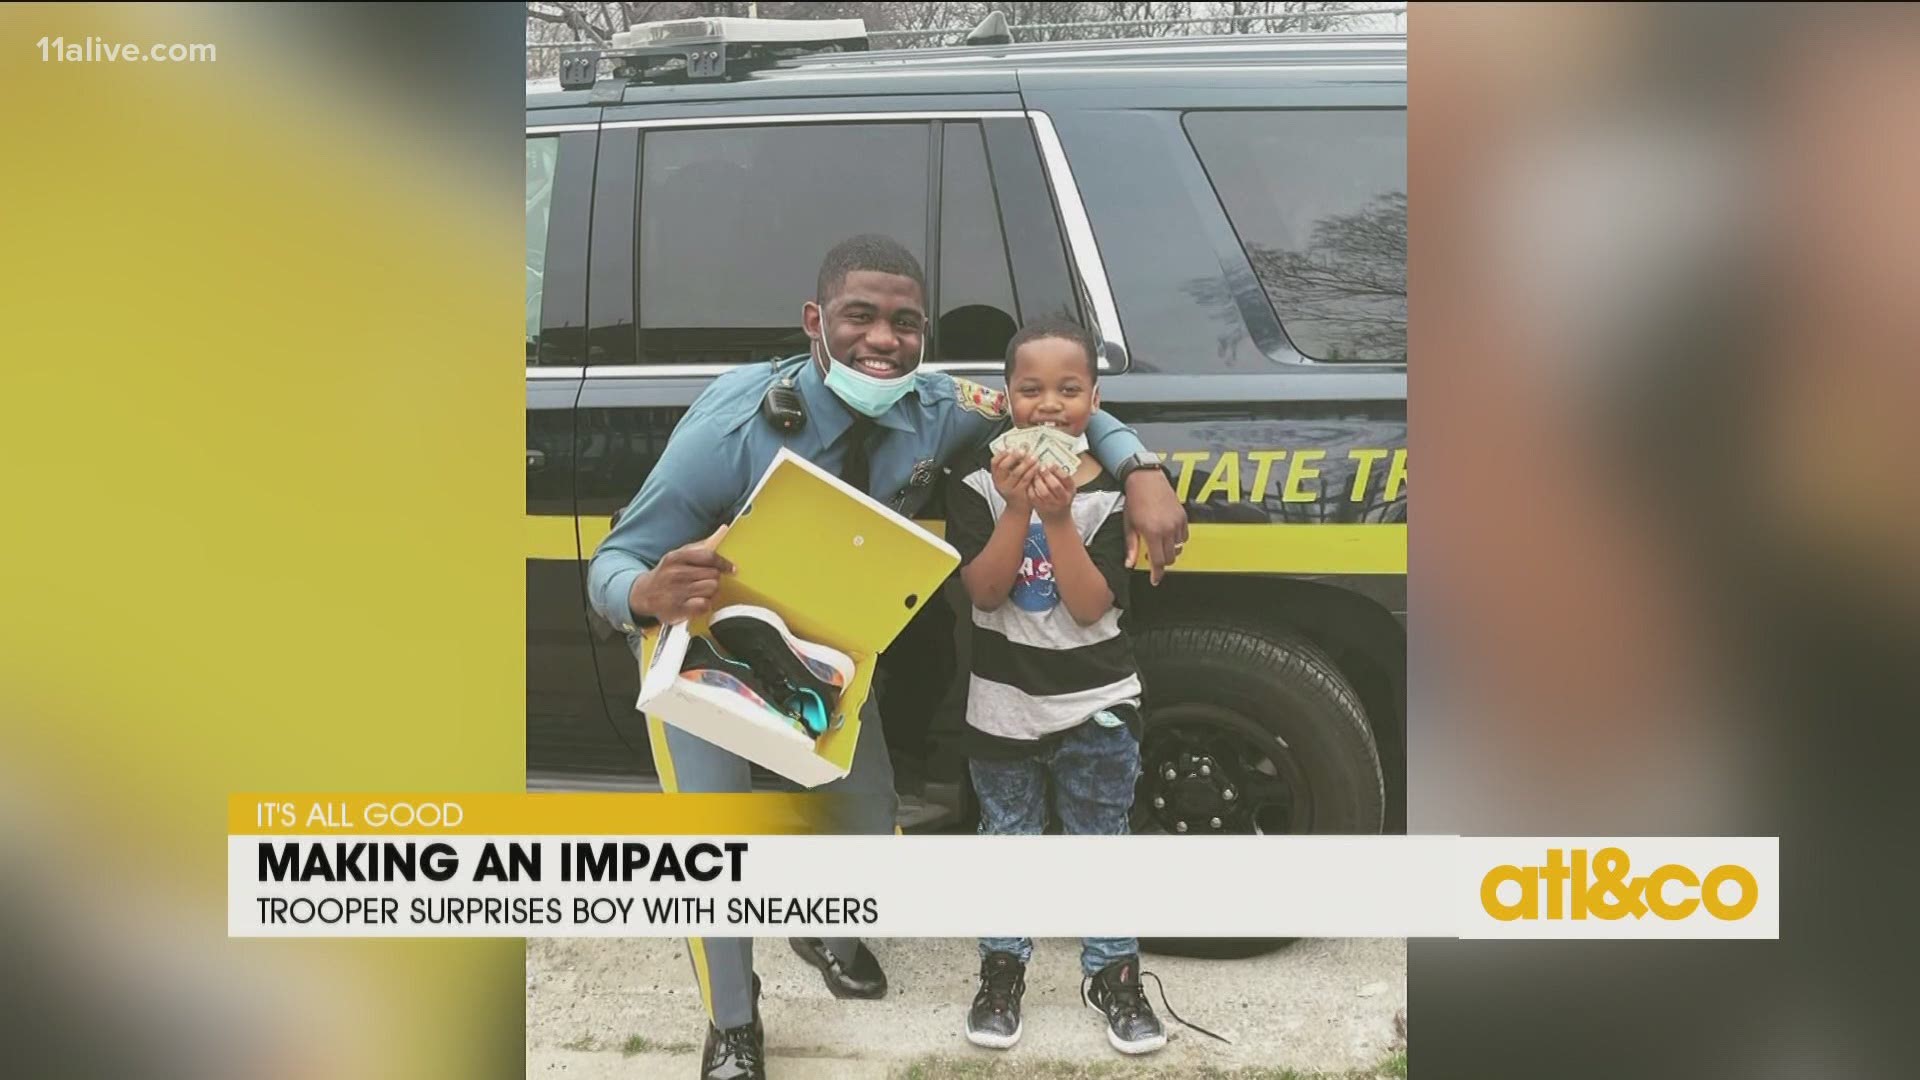 A Delaware state trooper surprised a 9-year-old boy with a brand new pair of sneakers designed by NBA star Stephen Curry.